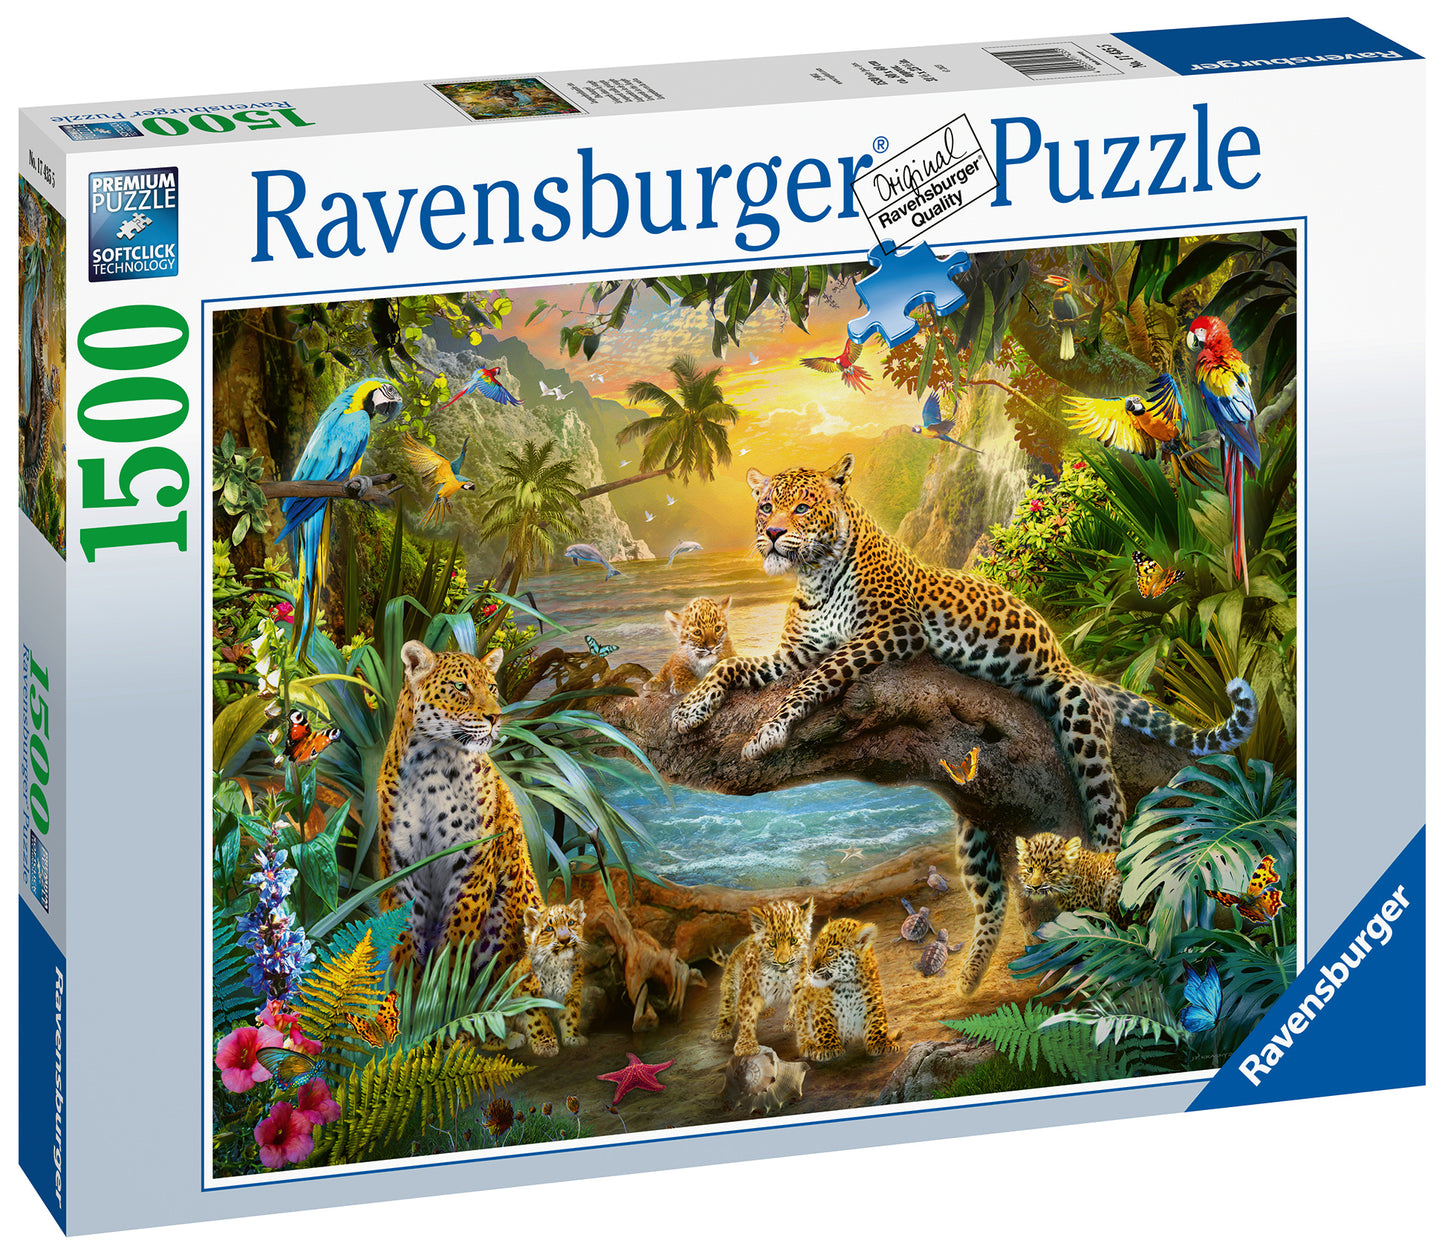 Ravensburger - Leopards in the Jungle - 1500 Piece Jigsaw Puzzle